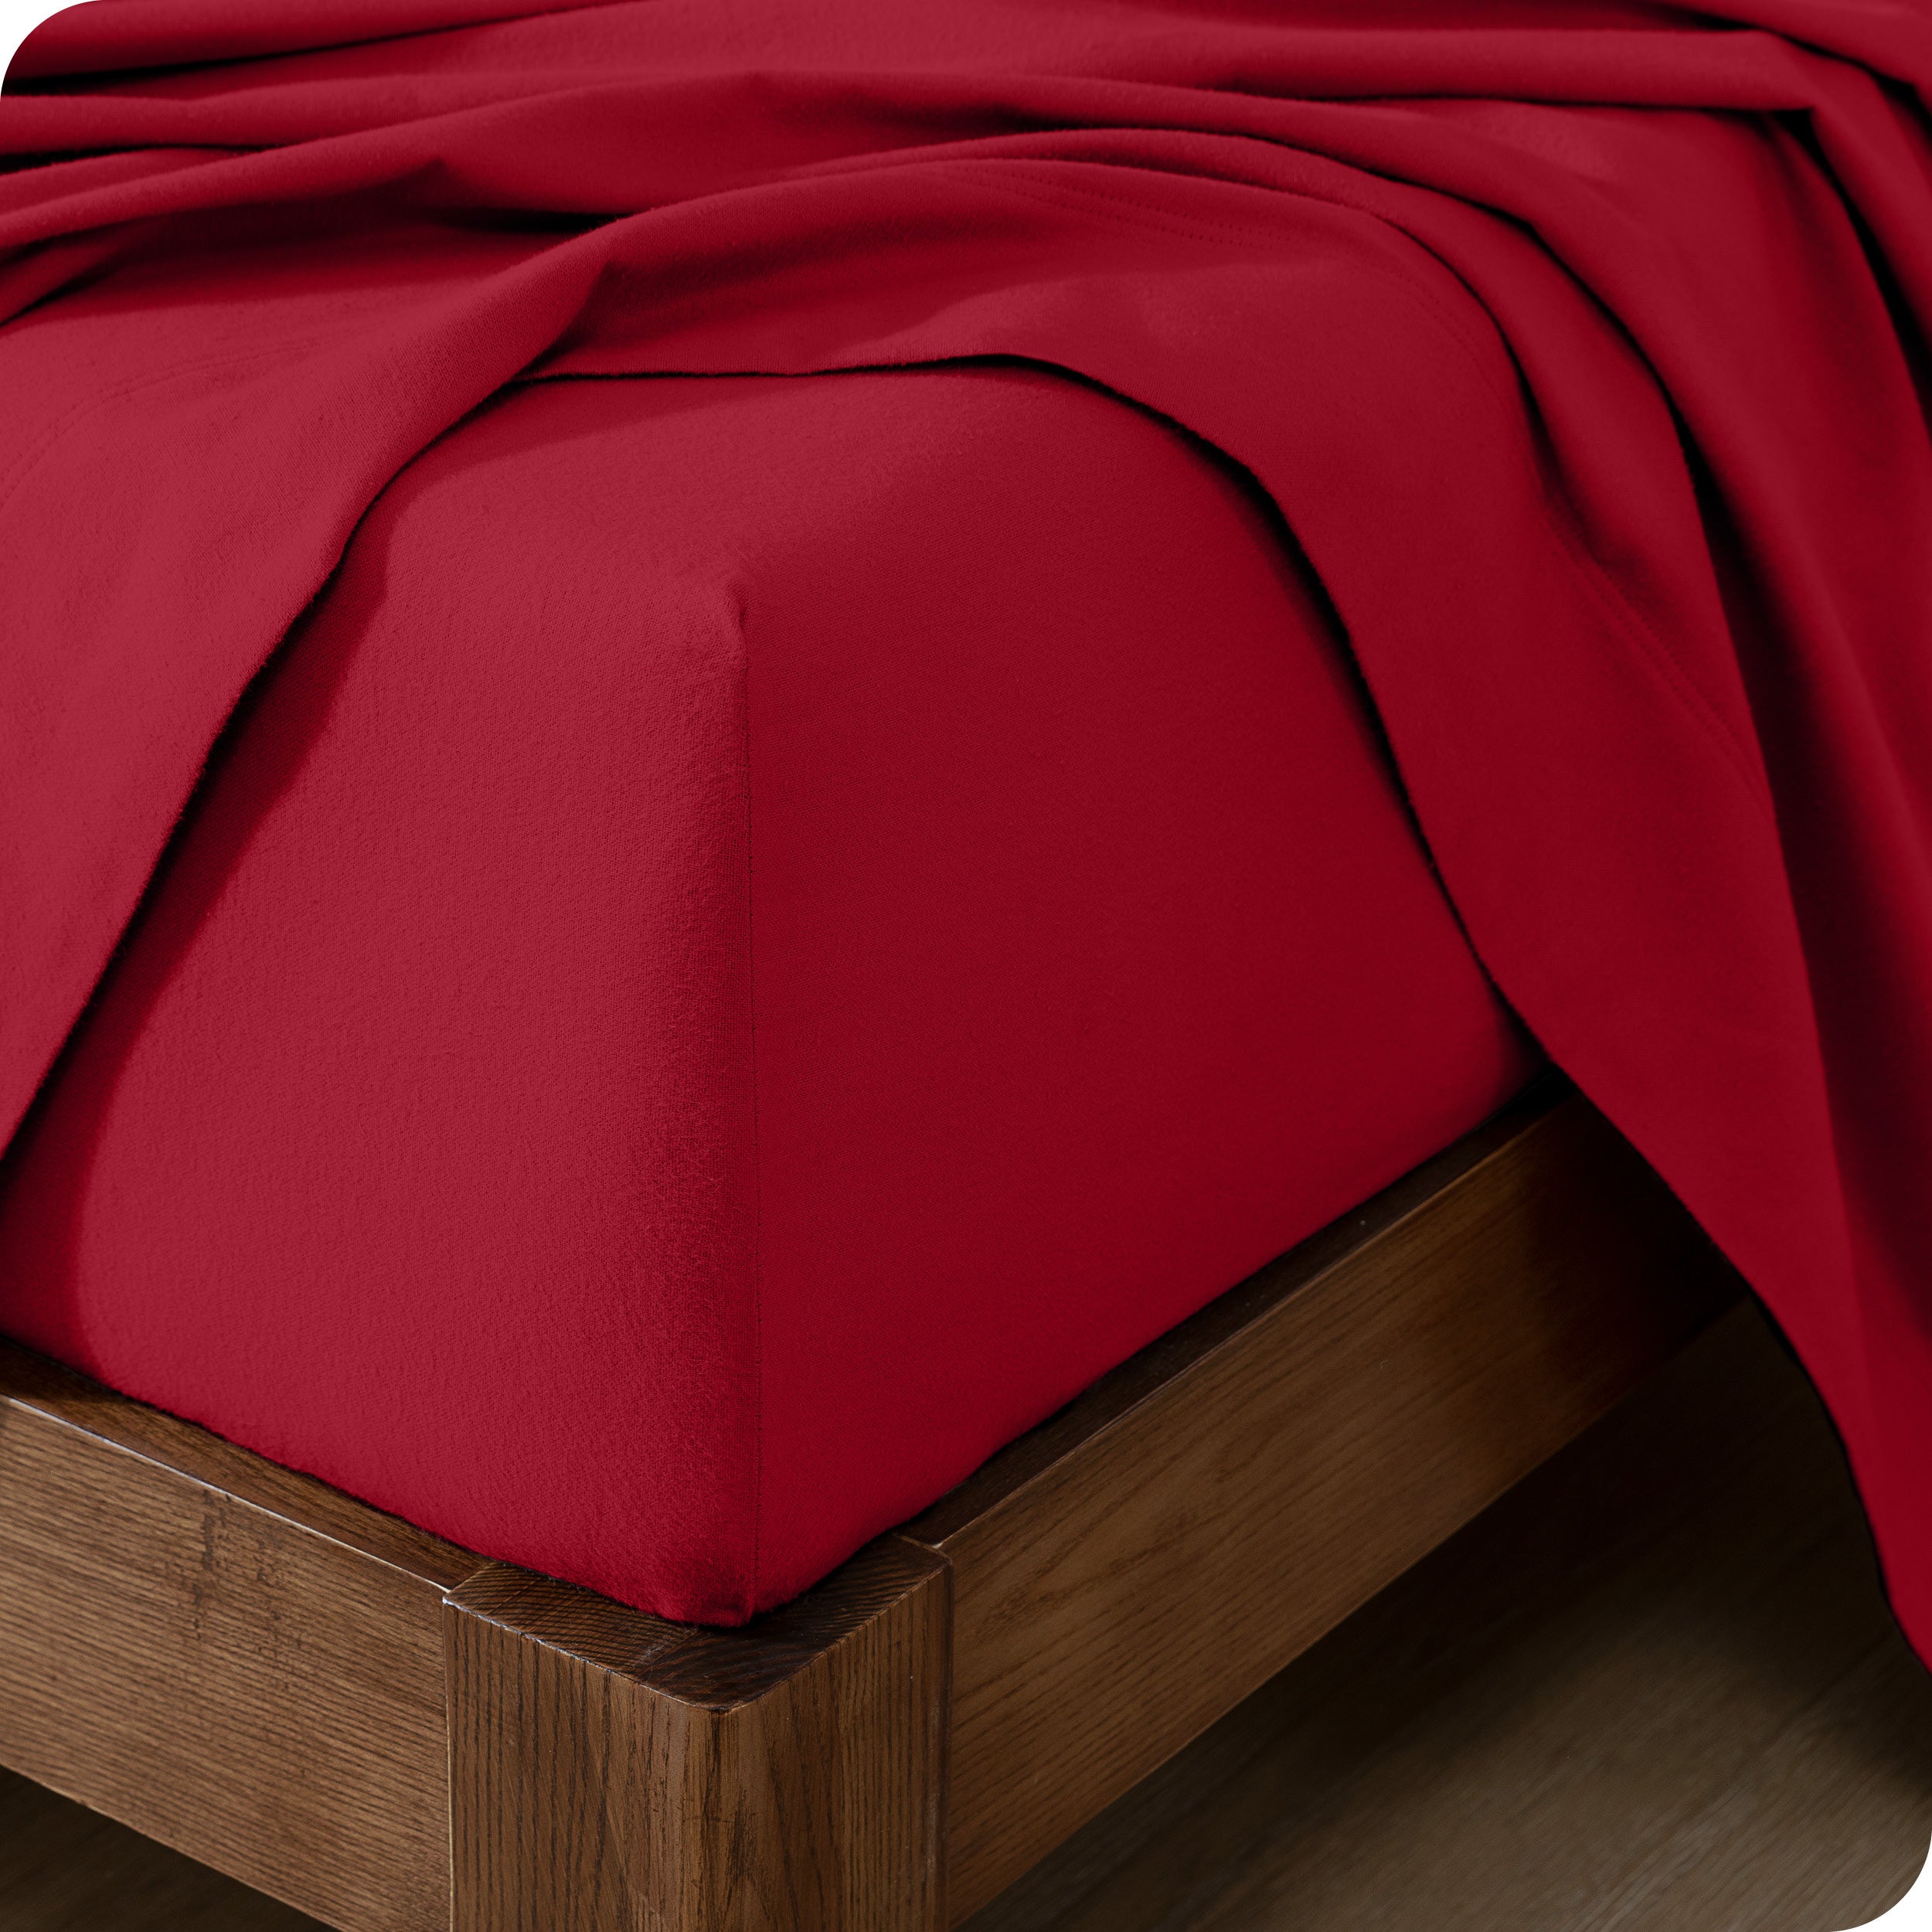 Close up of the corner of a mattress with a flannel fitted sheet and flat sheet on it